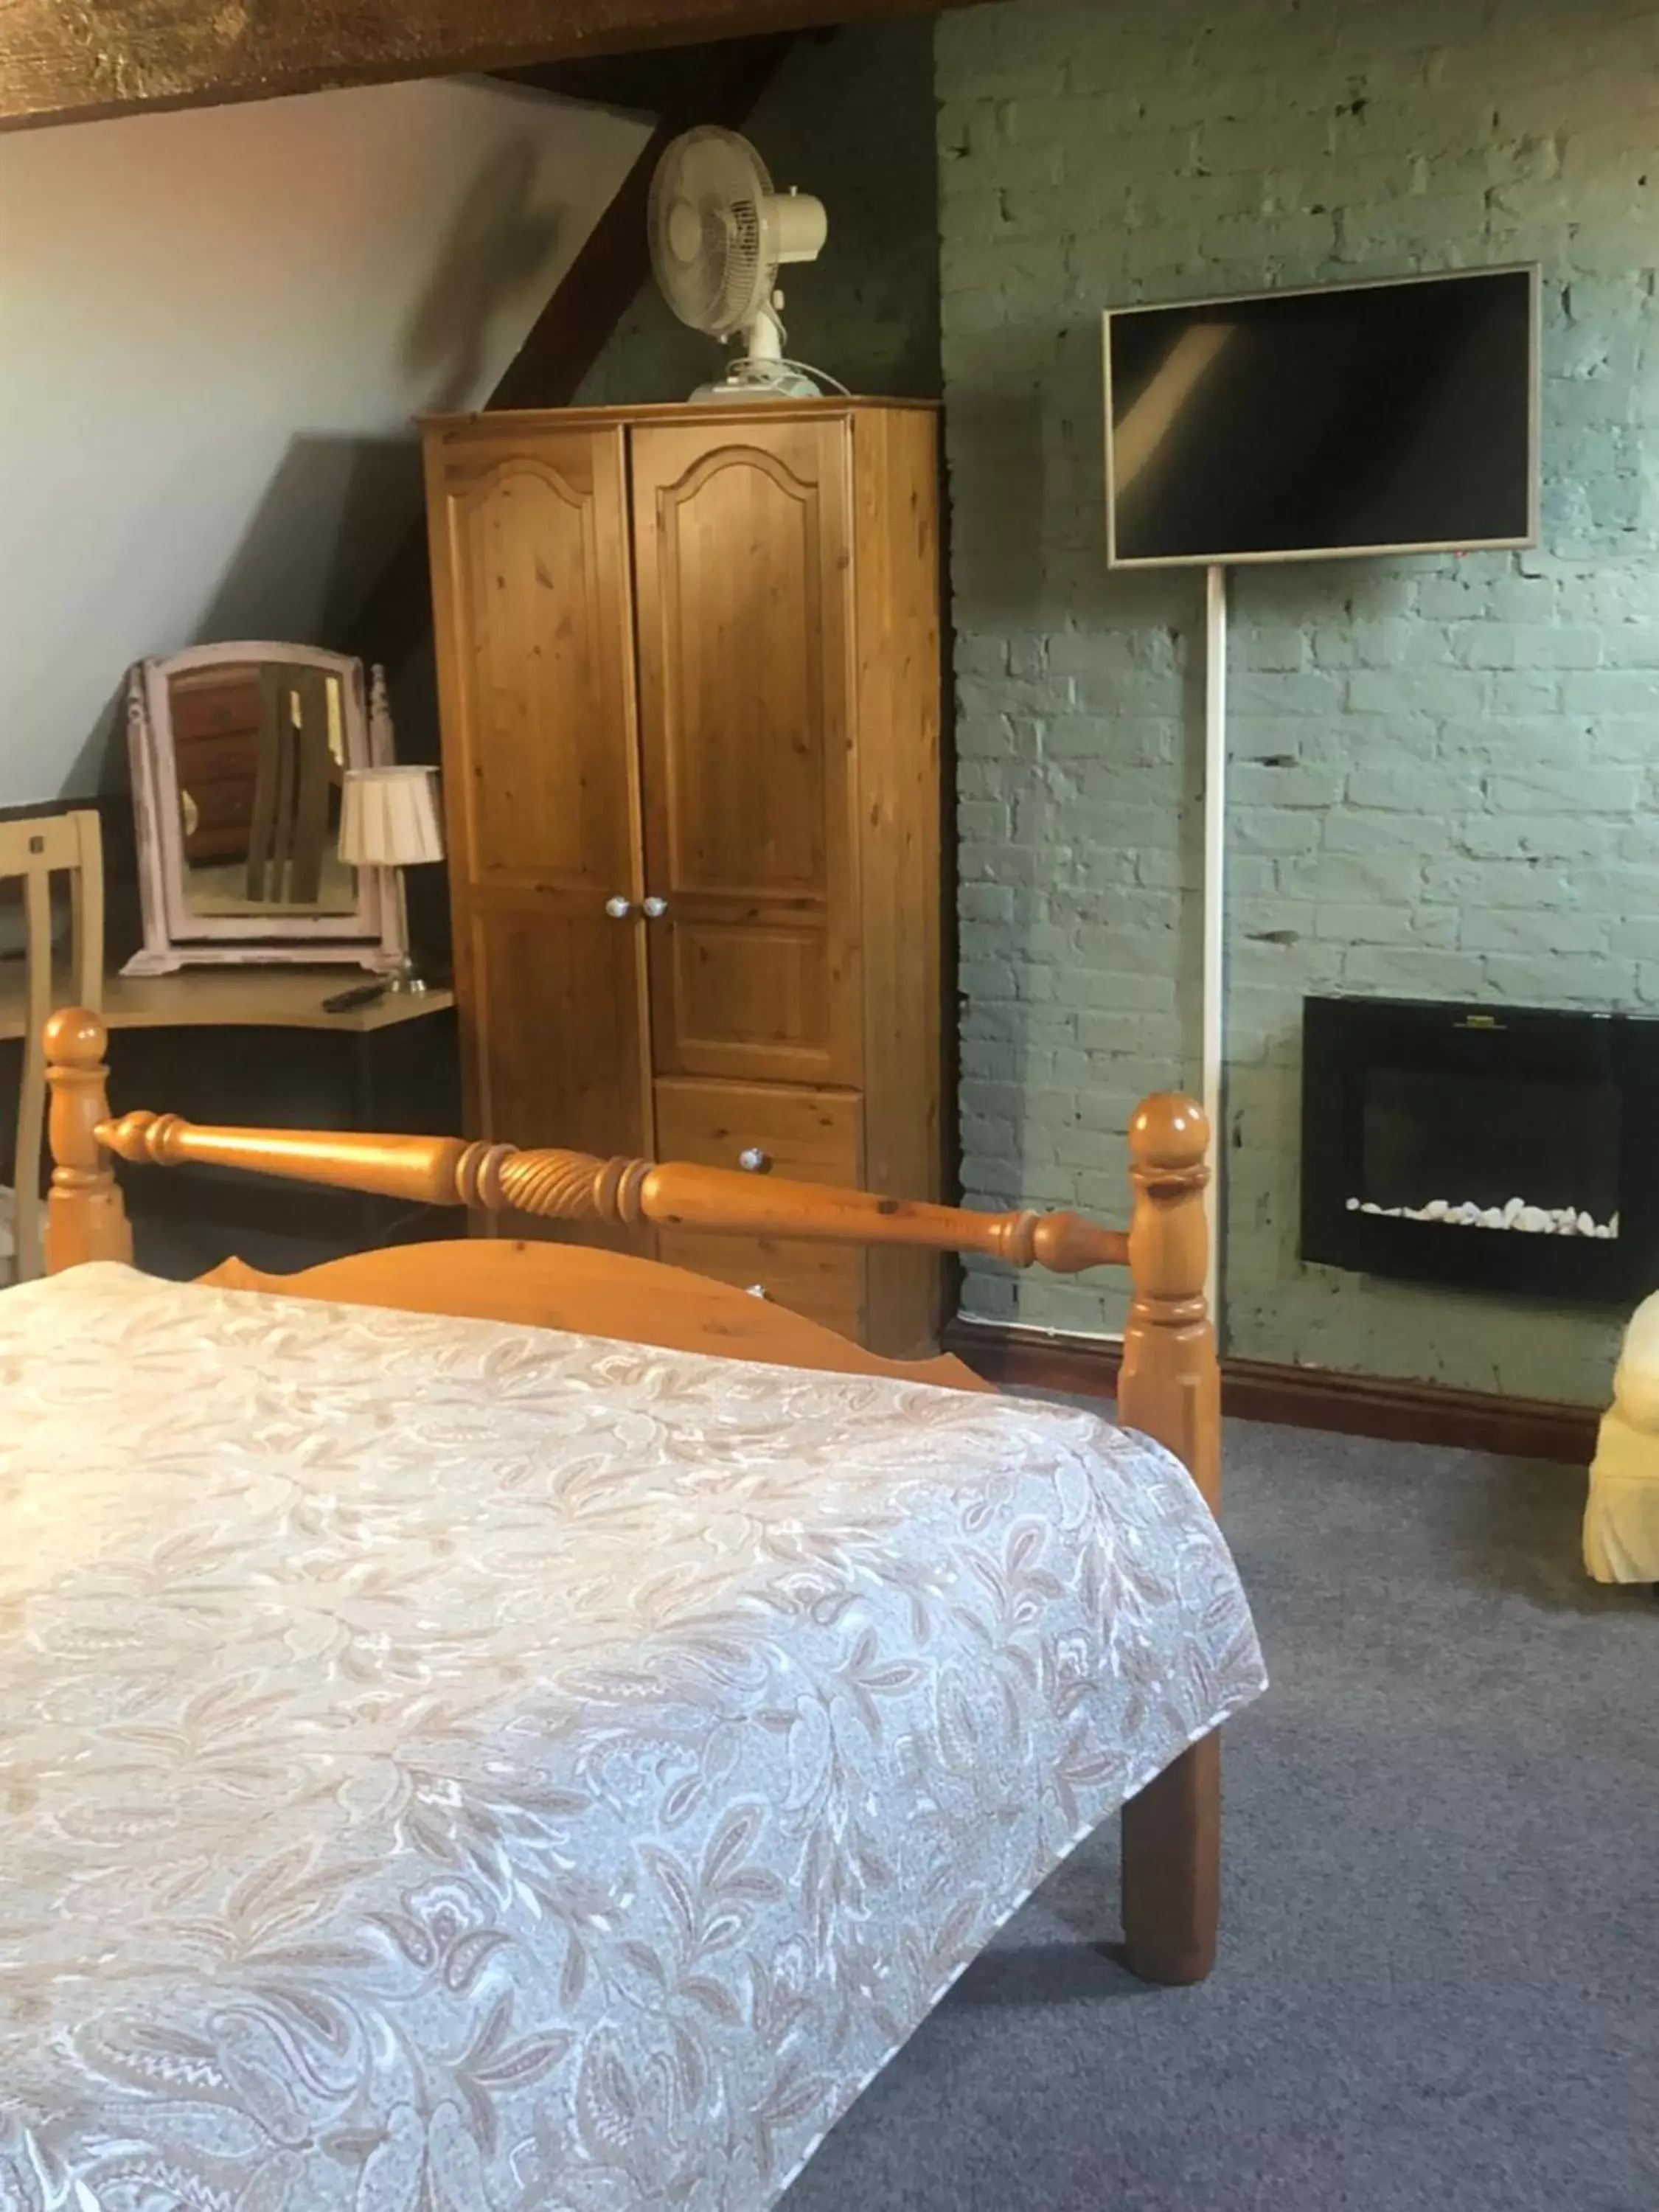 Deluxe Suite in The Ilchester Arms Hotel, Ilchester Somerset